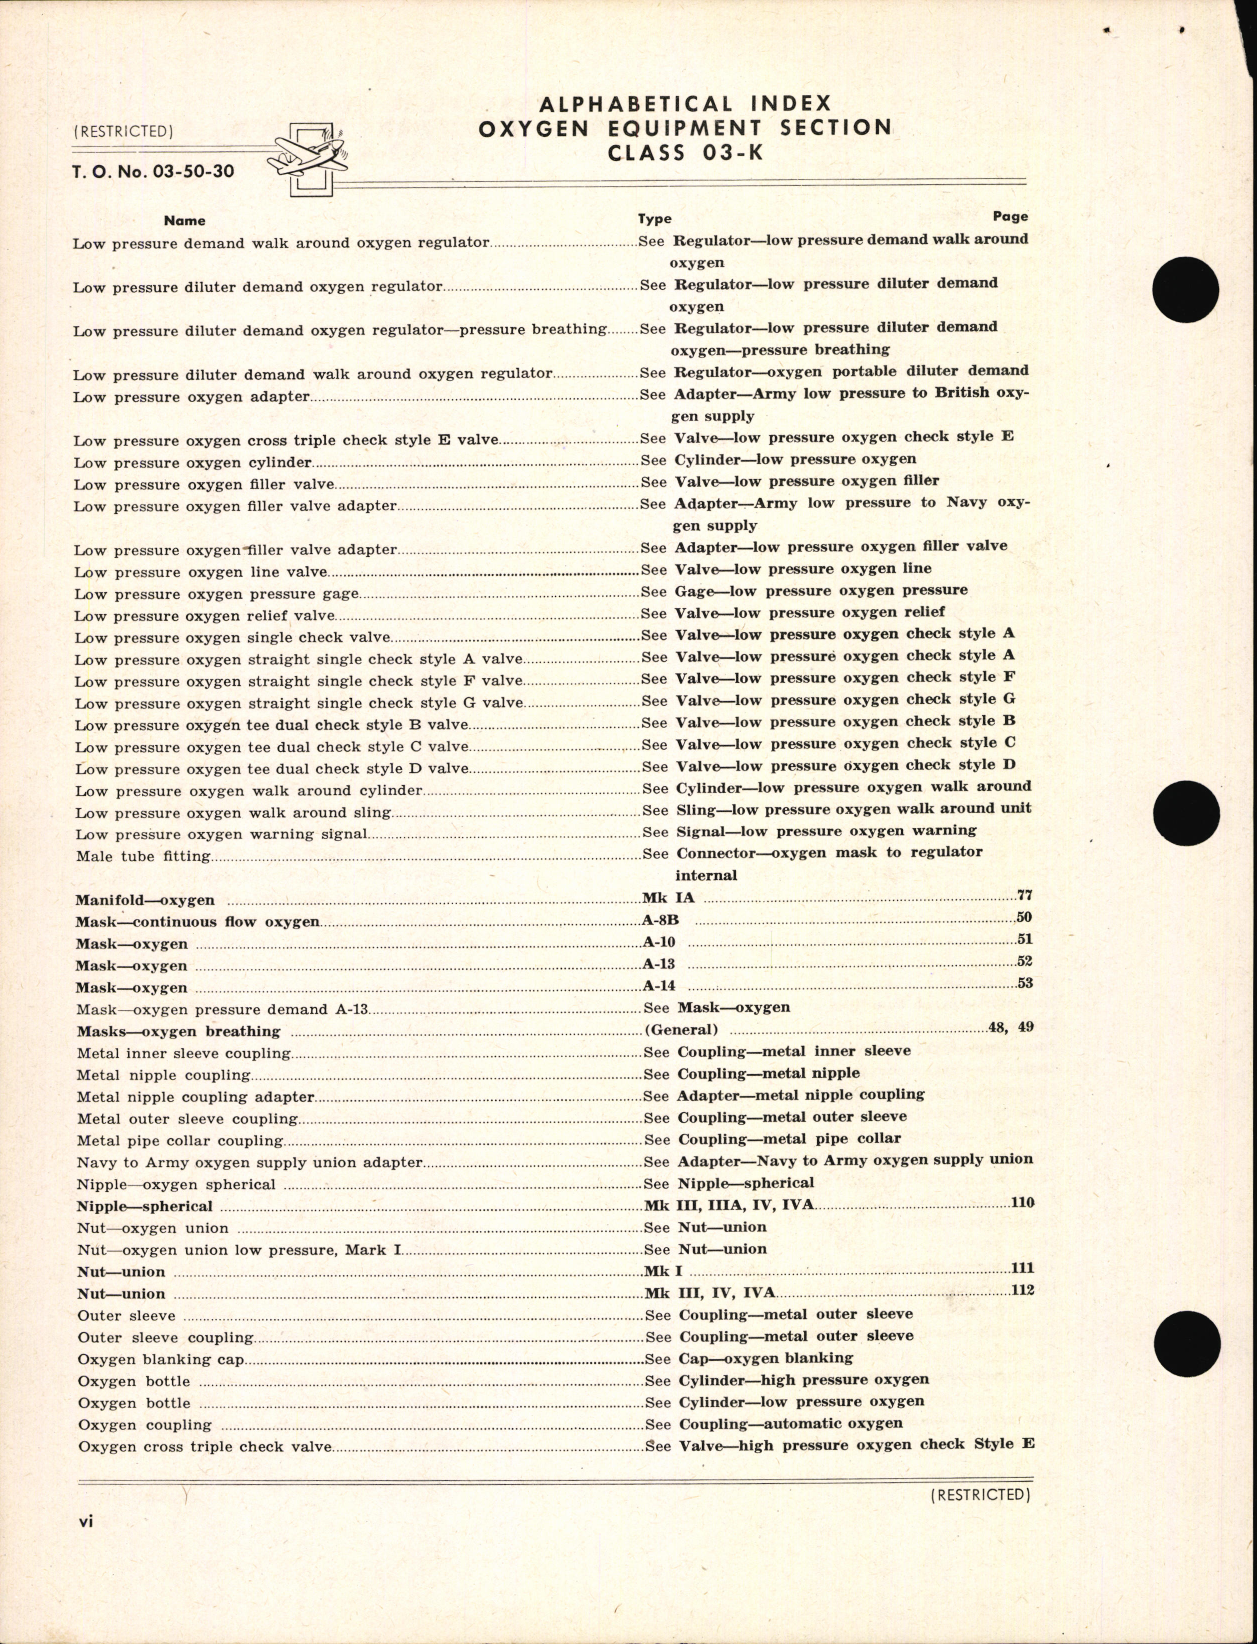 Sample page 8 from AirCorps Library document: Index of Army-Navy Aeronautical Equipment - Oxygen